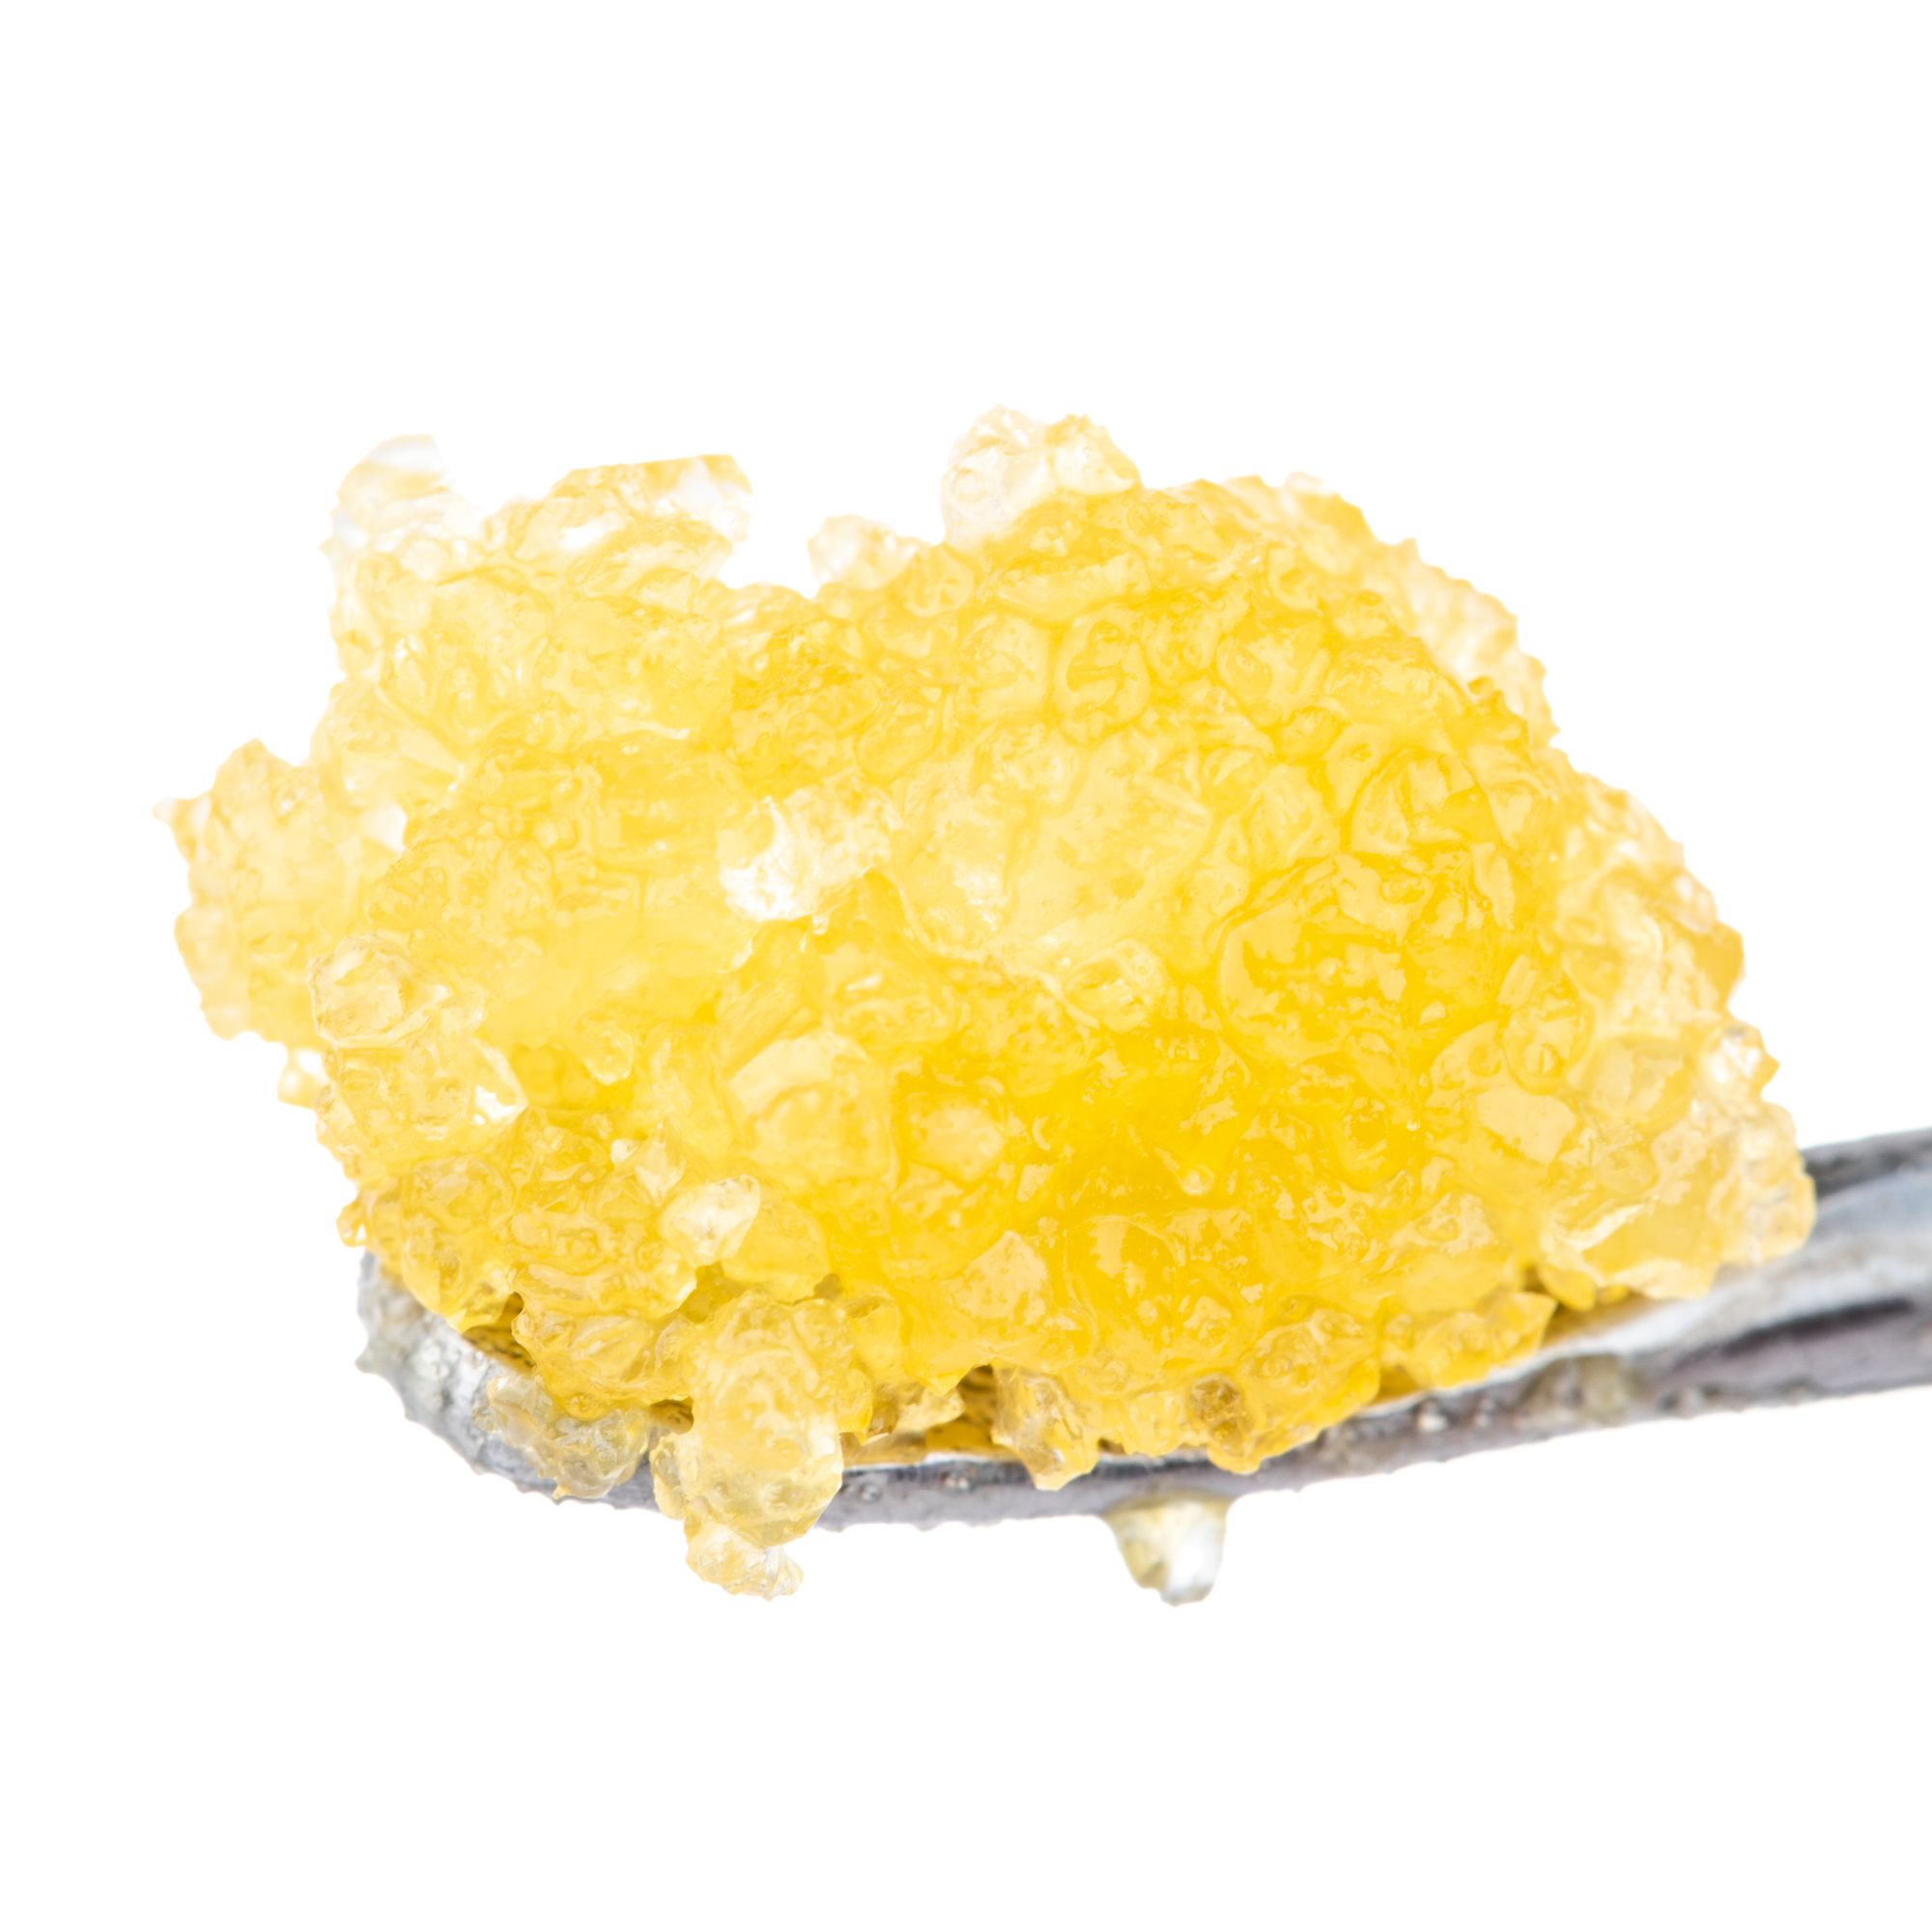 Sour Strawberry Live Resin